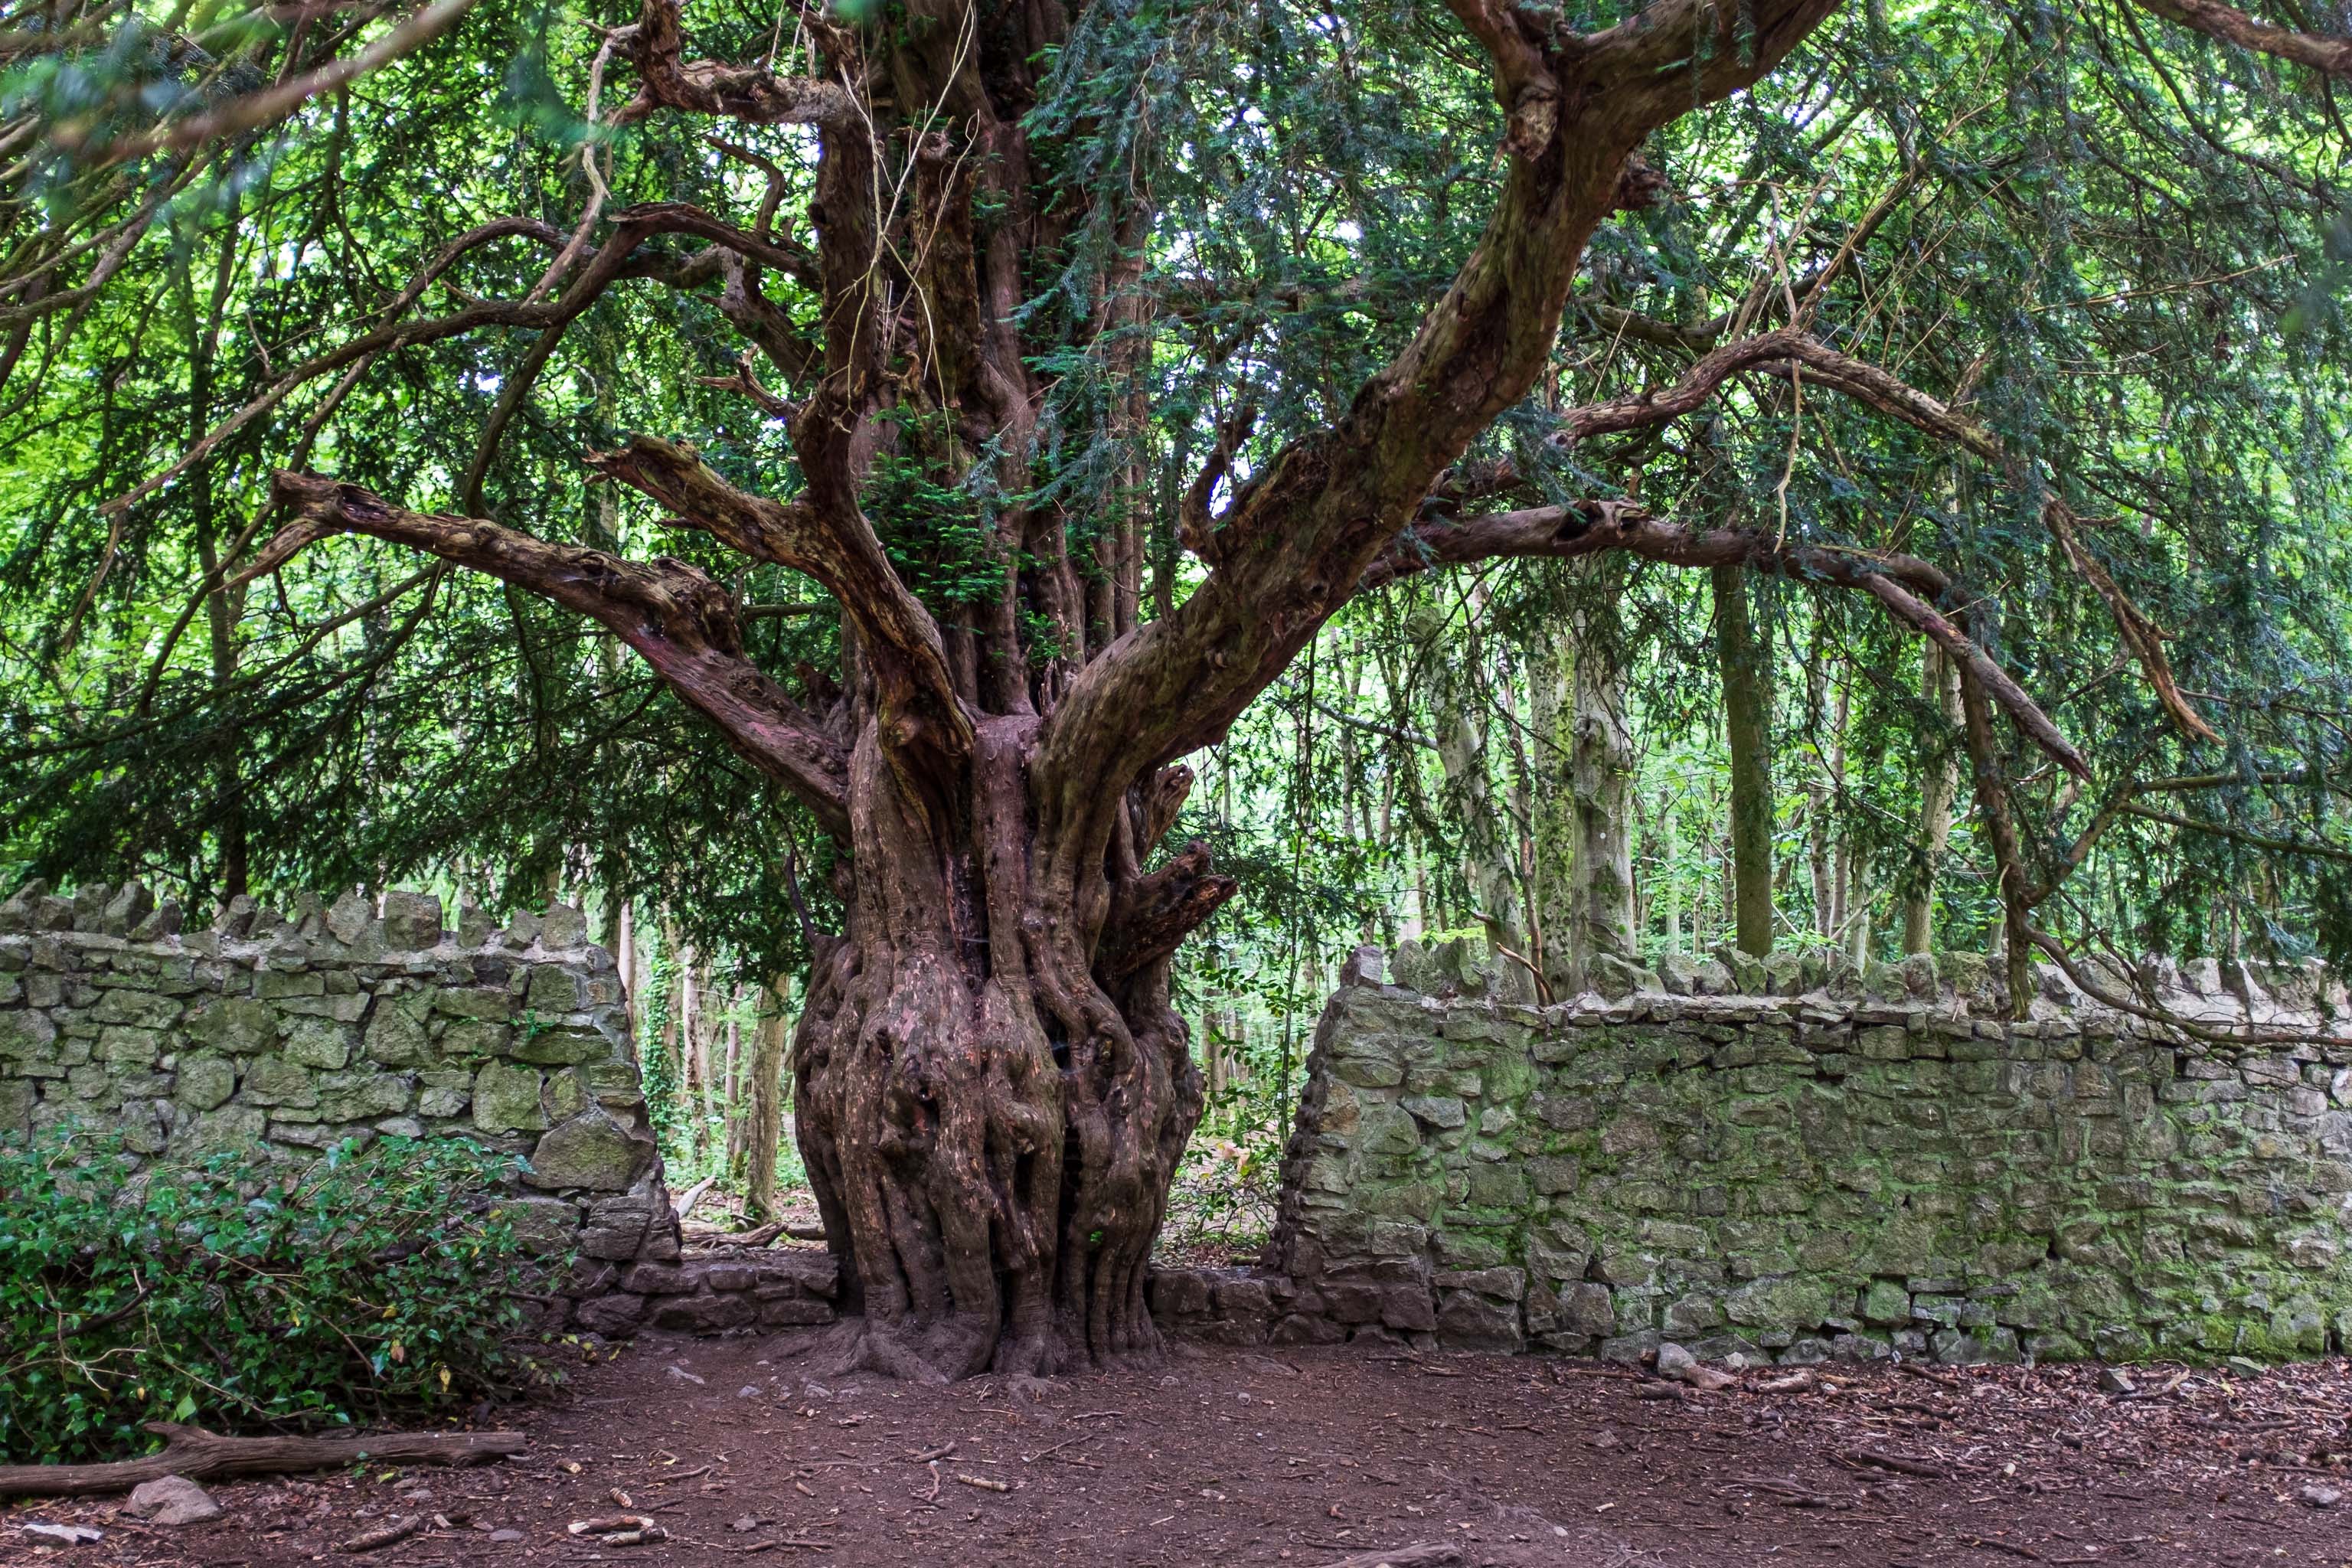 
                                Yew

                                                                    My favourite tree in Leigh Woods. Some of the bricks from the wall are actually embedded in the trunk; presumably there was a period where people d...
                                                                